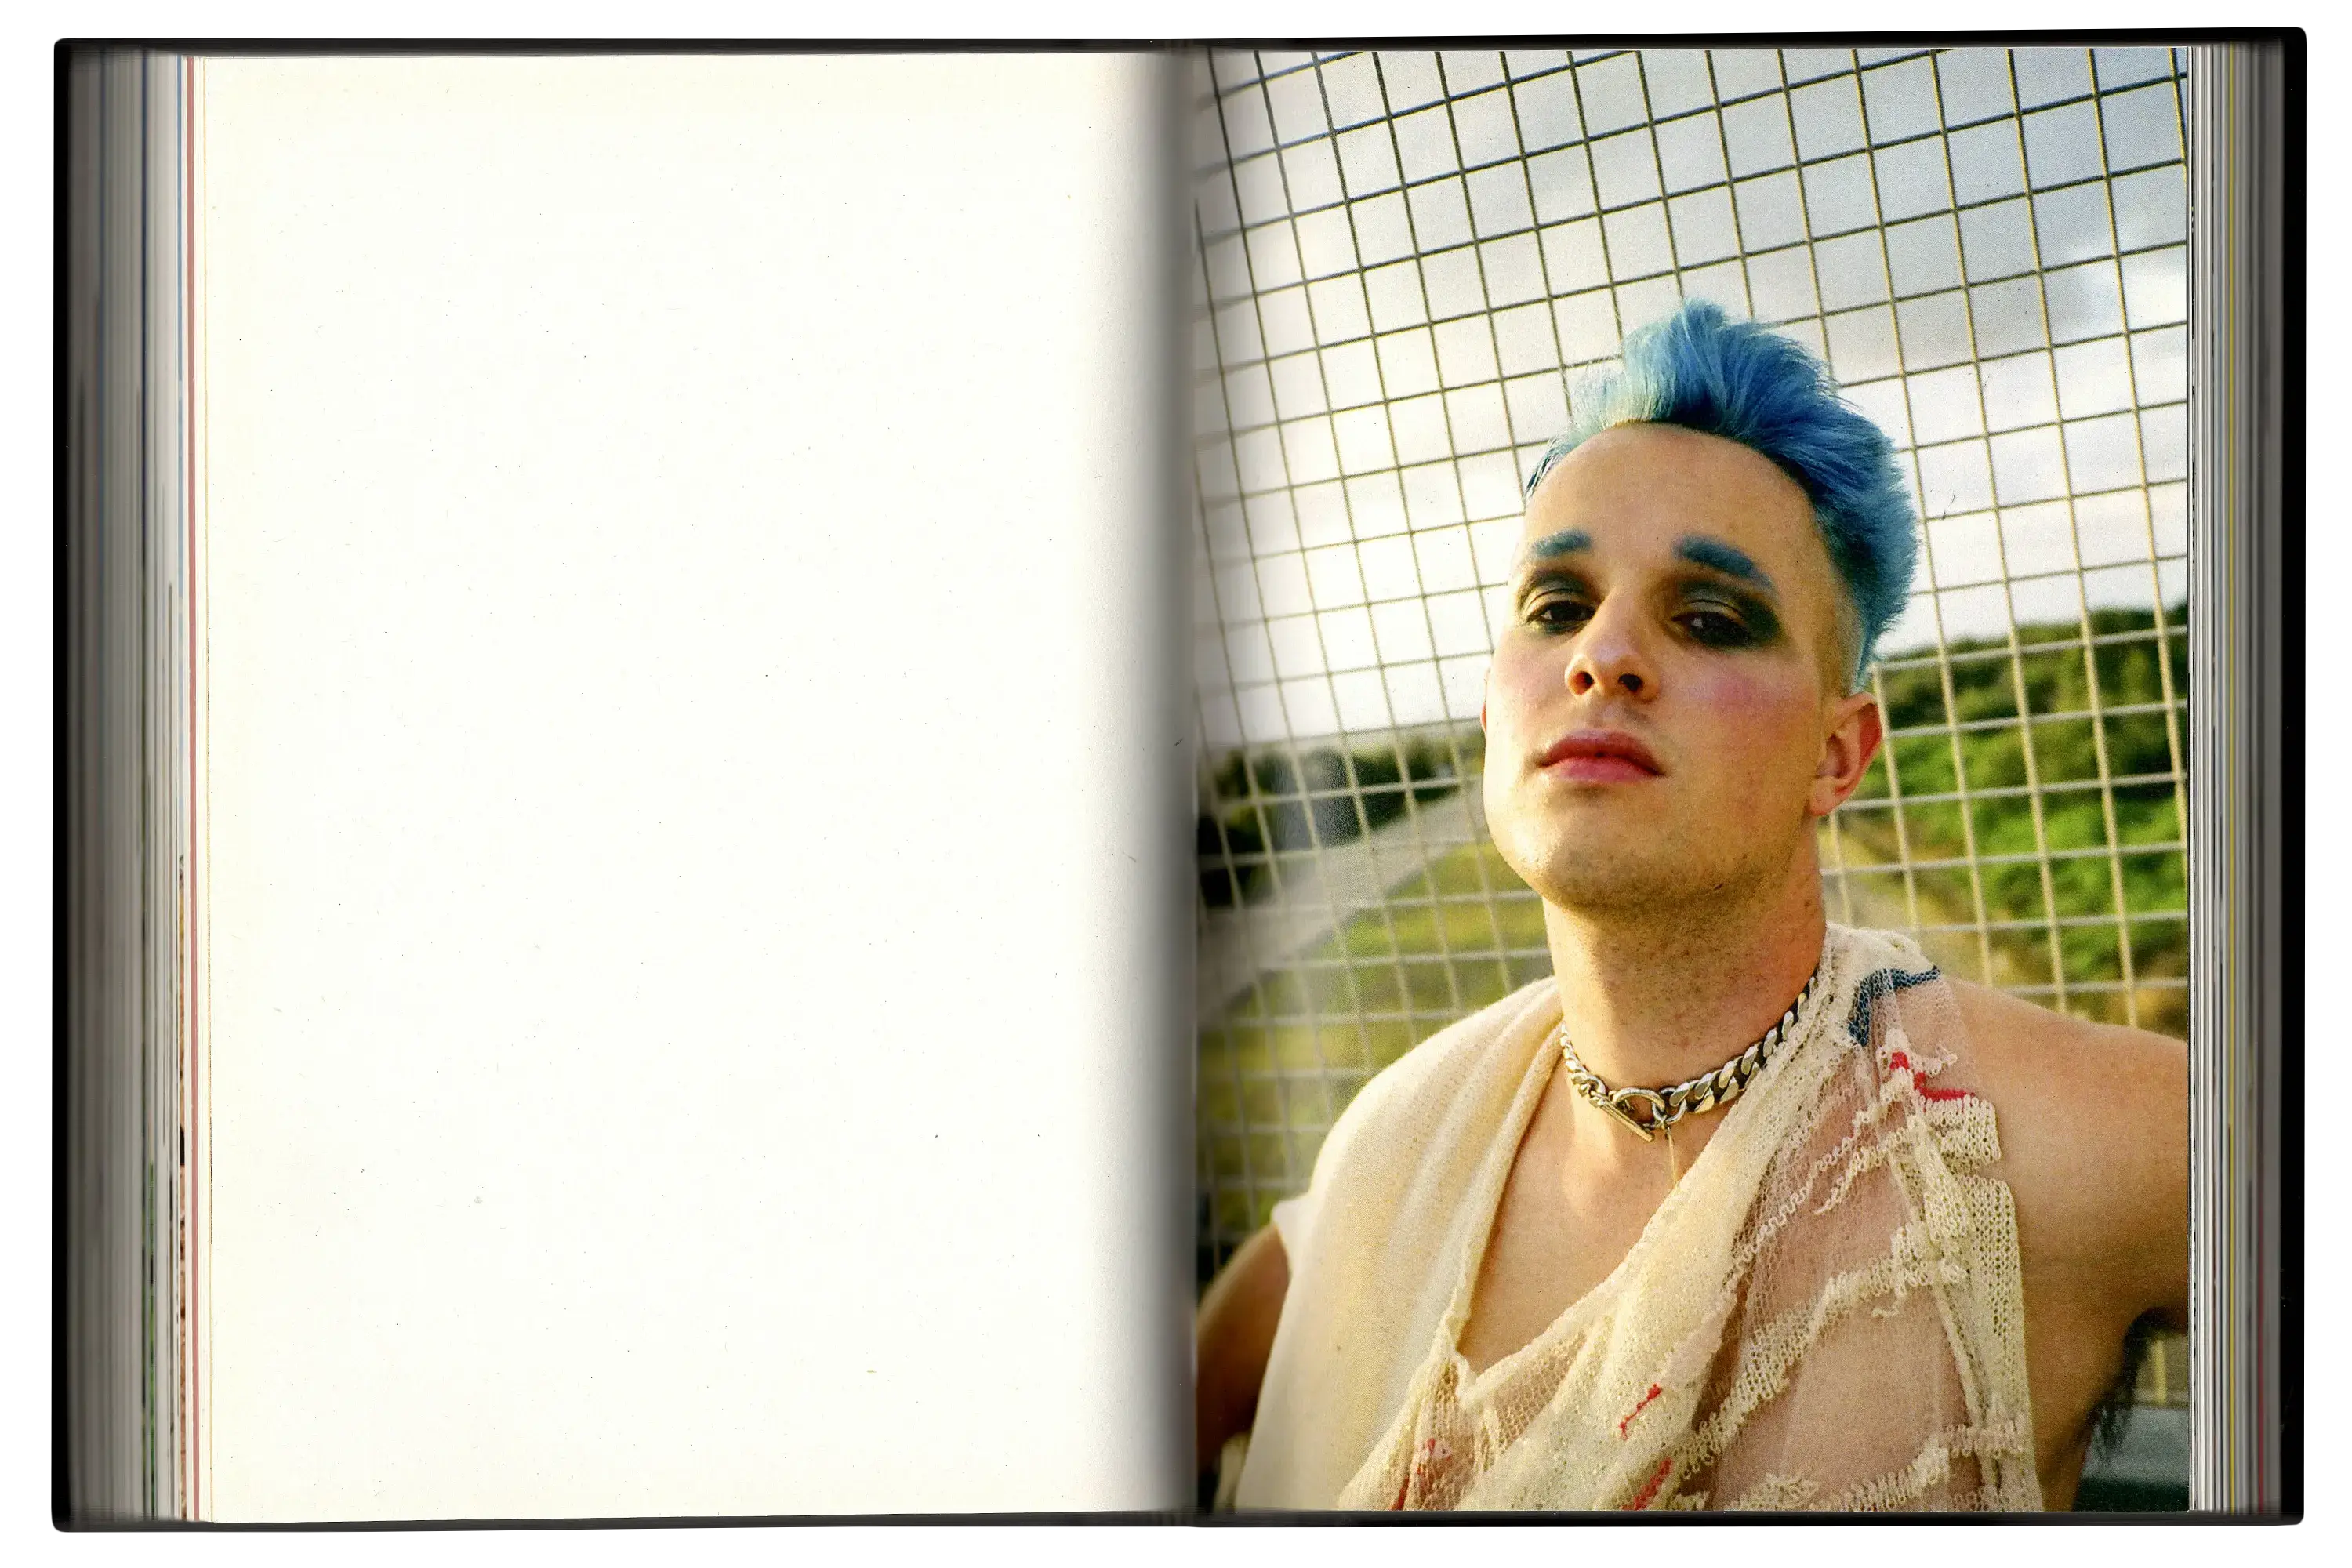 Imperfect Photo Book - left page blank, right page shows person with blue hair posing with draped fabric over their shoulders